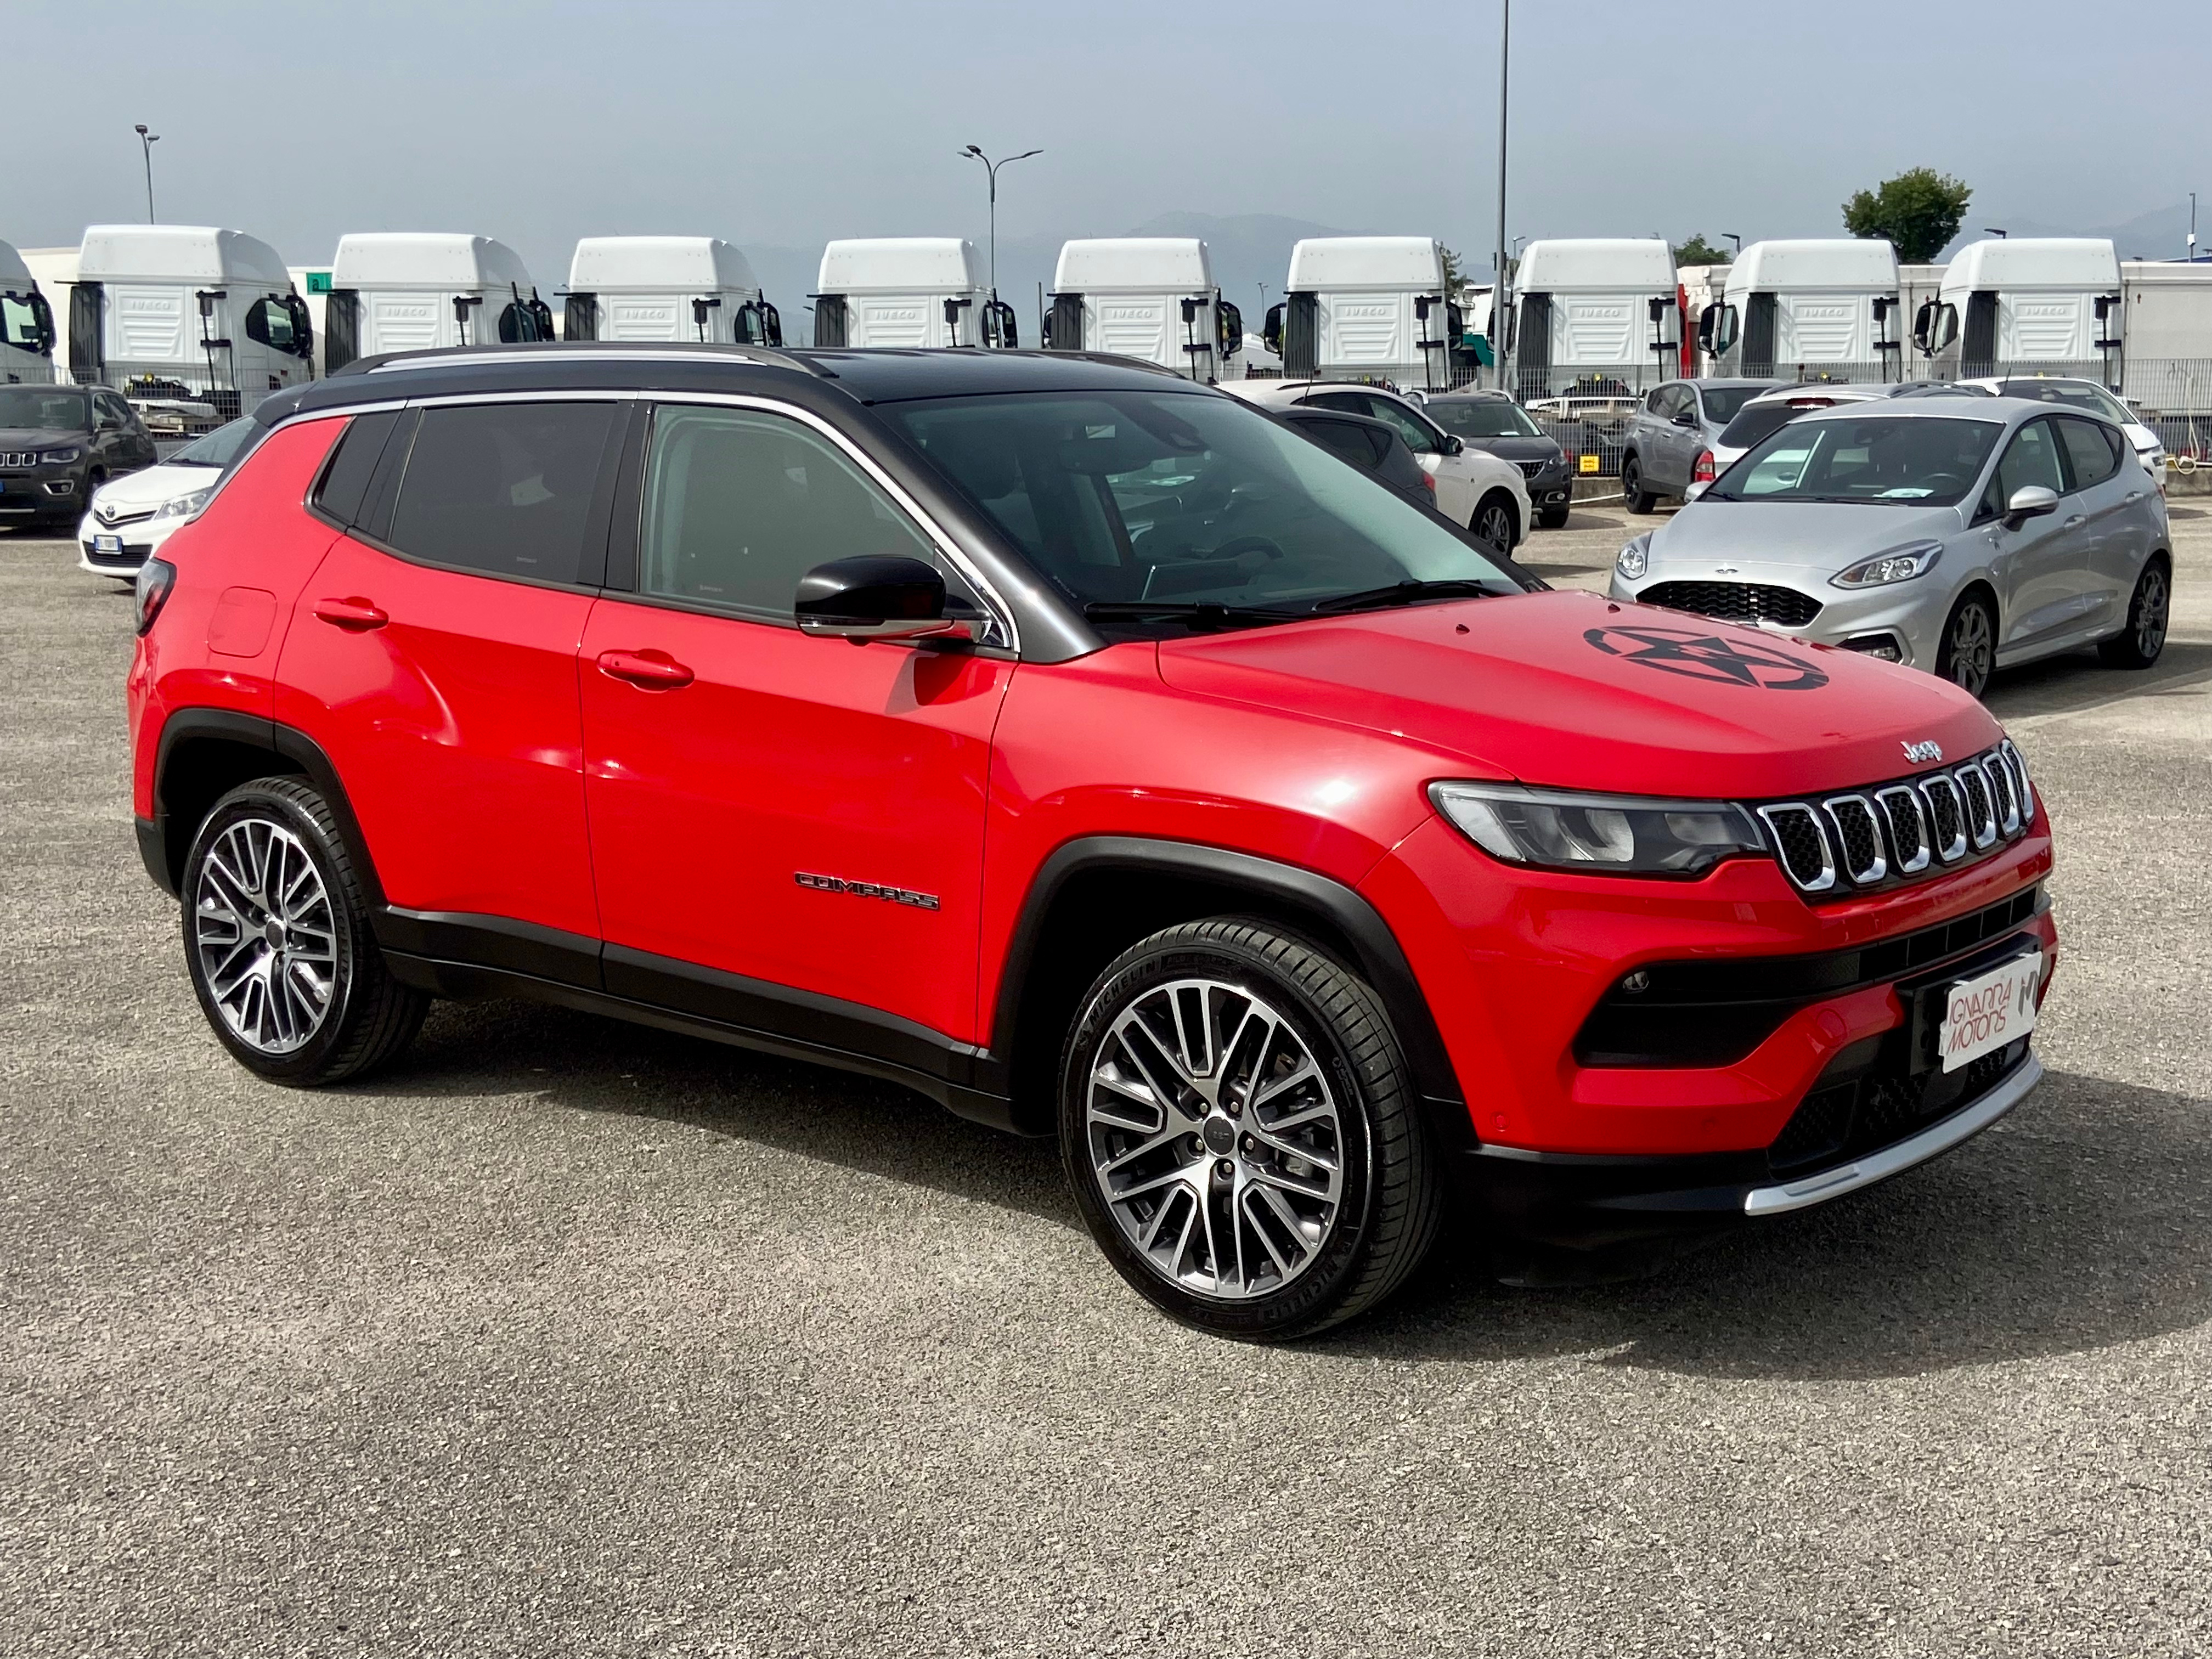 Jeep Compass | 1.3 TURBO T4 LIMITED 2WD 131CV 19” RED